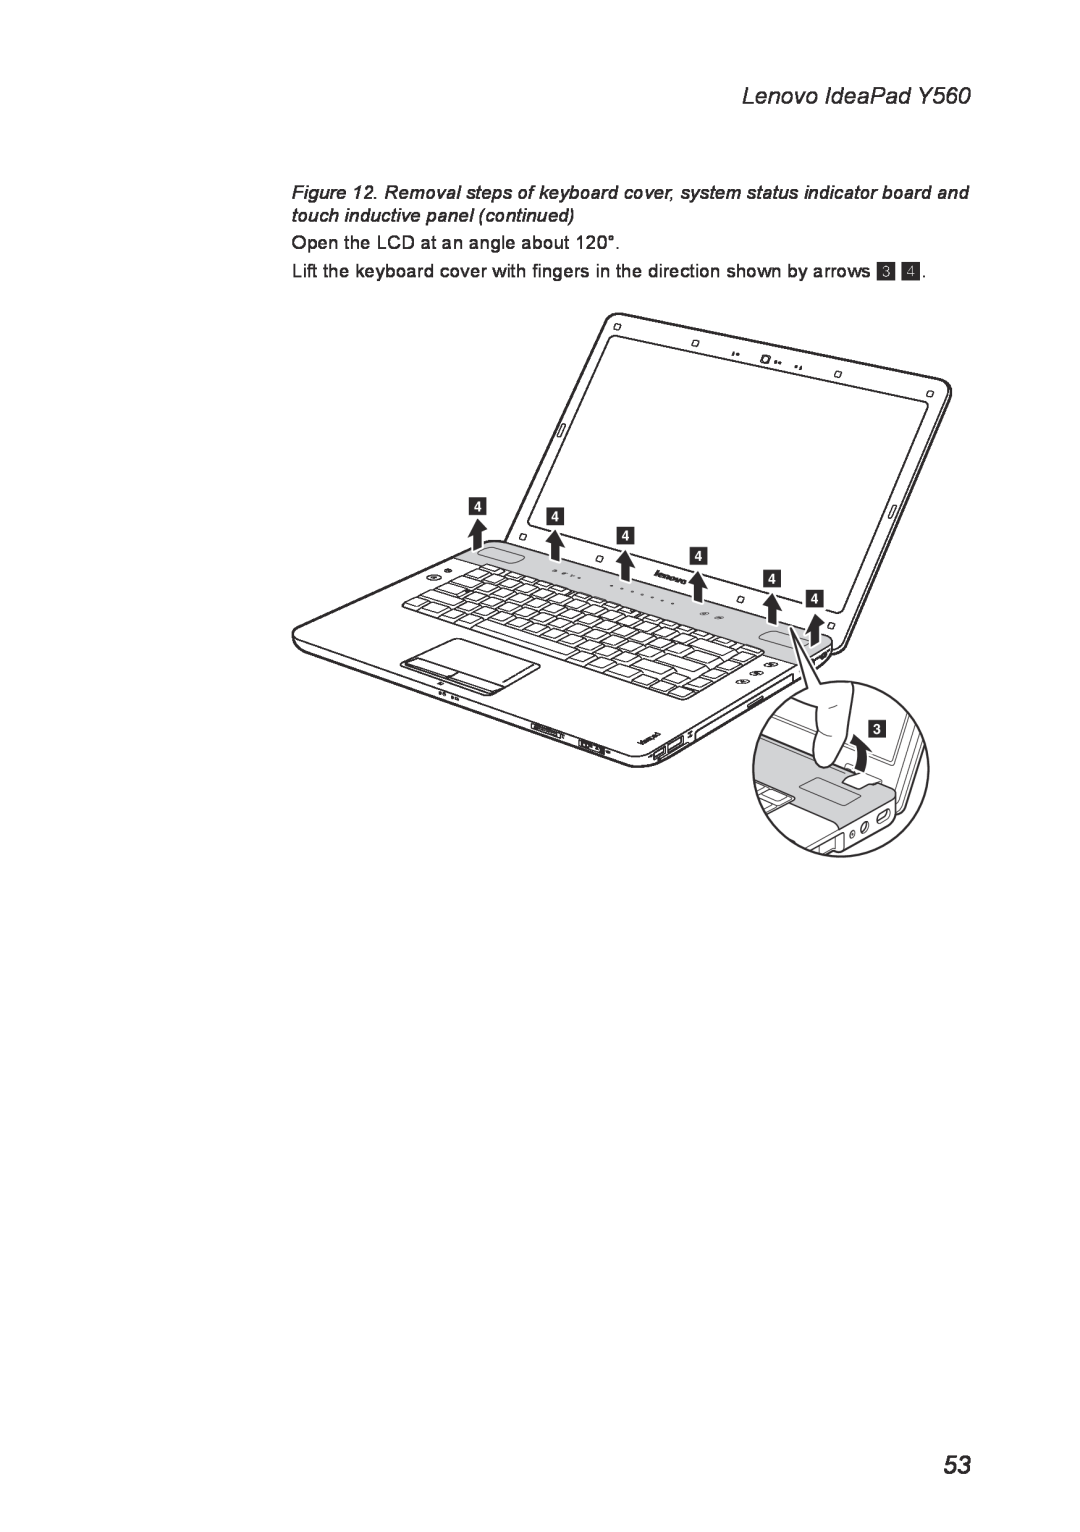 Lenovo manual Lenovo IdeaPad Y560, Open the LCD at an angle about 